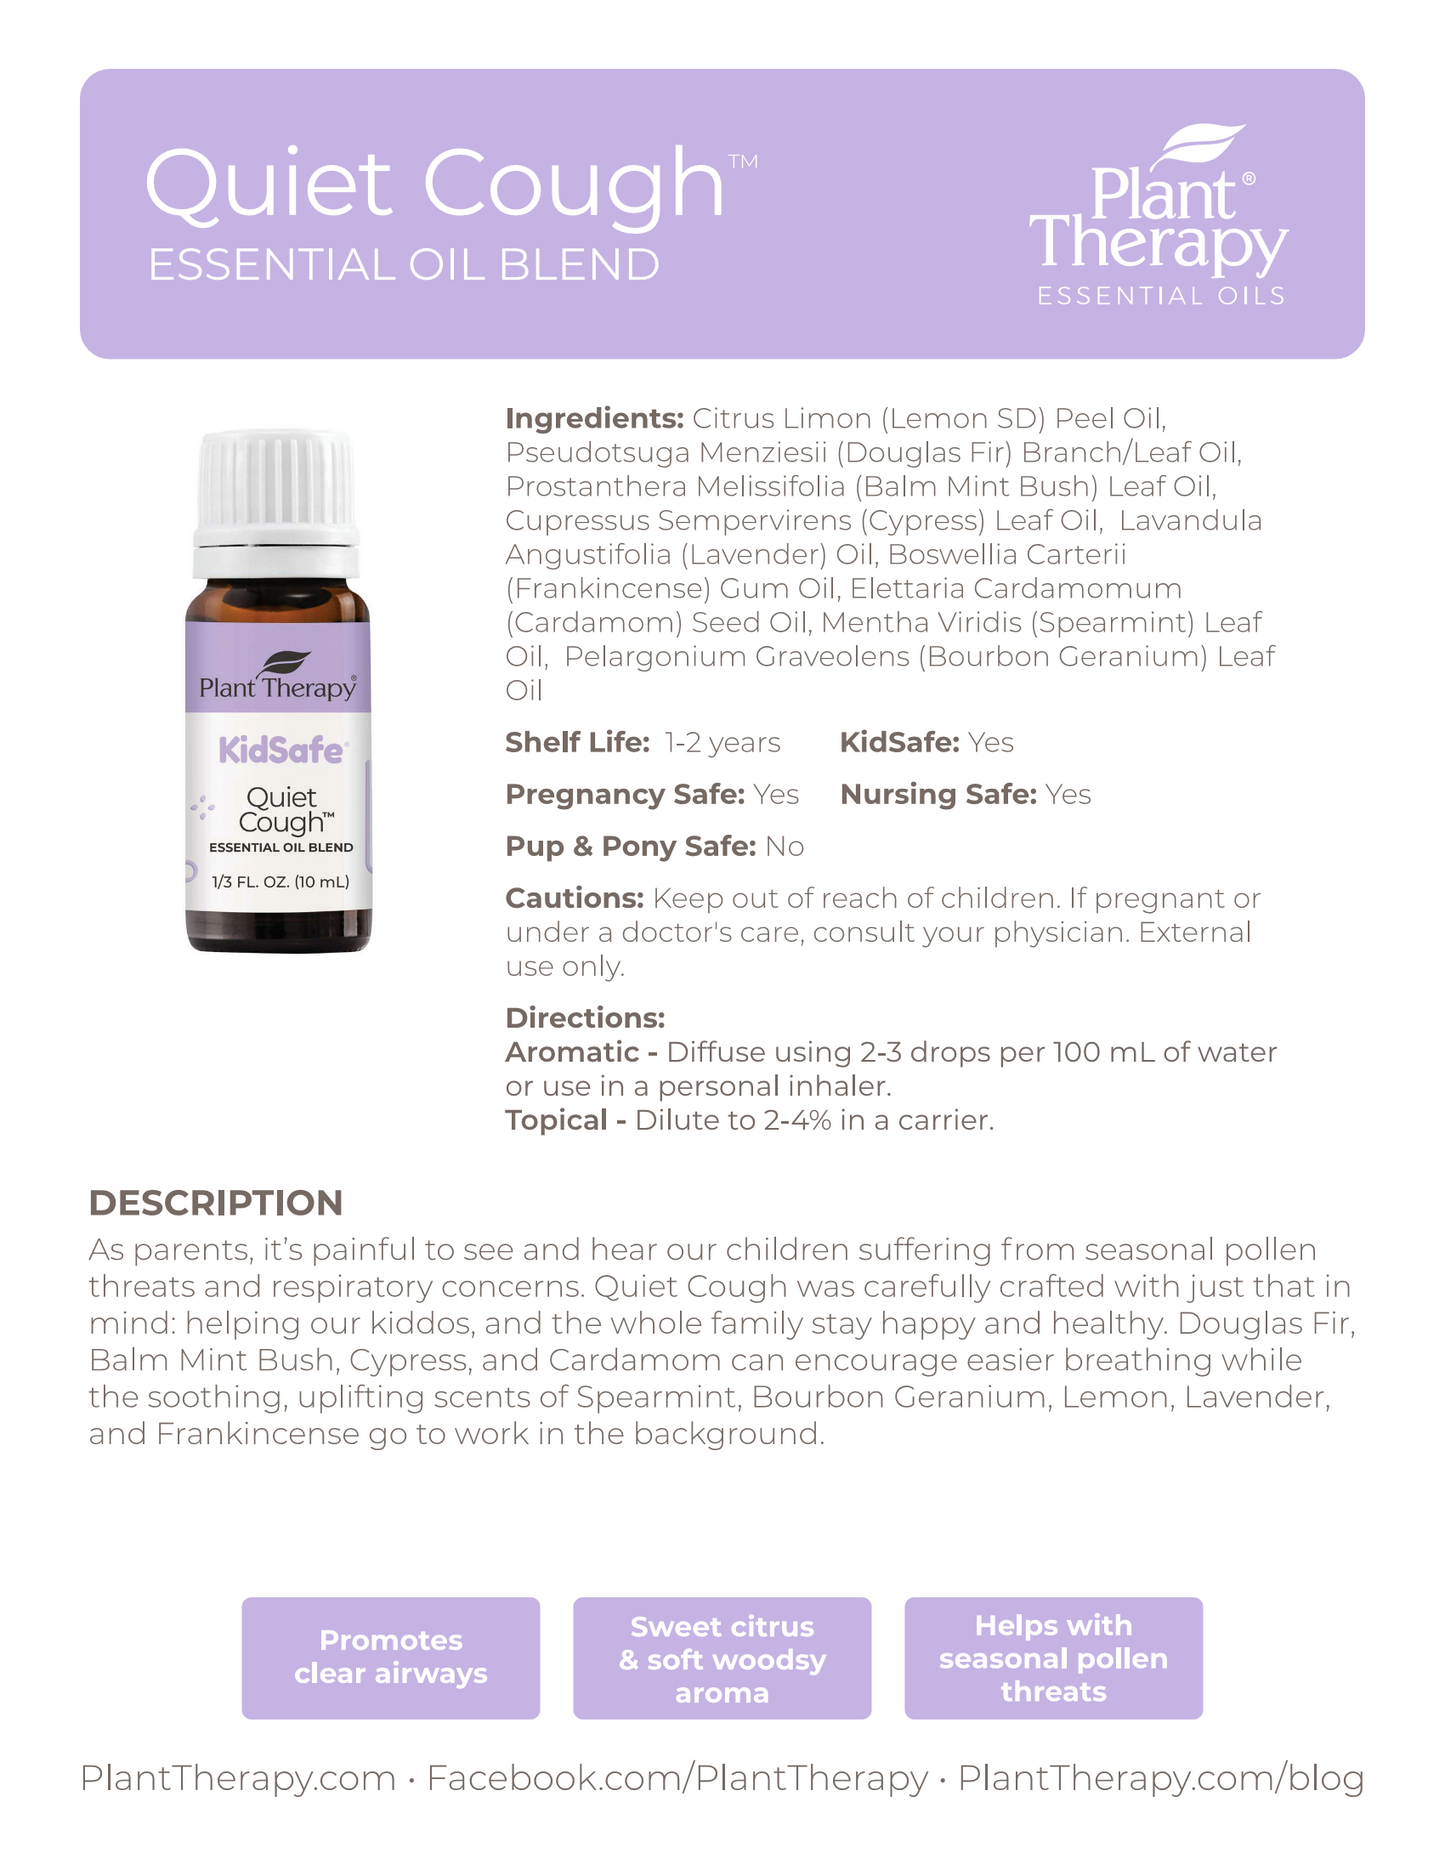 Quiet Cough™ KidSafe Essential Oil Blend by Plant Therapy